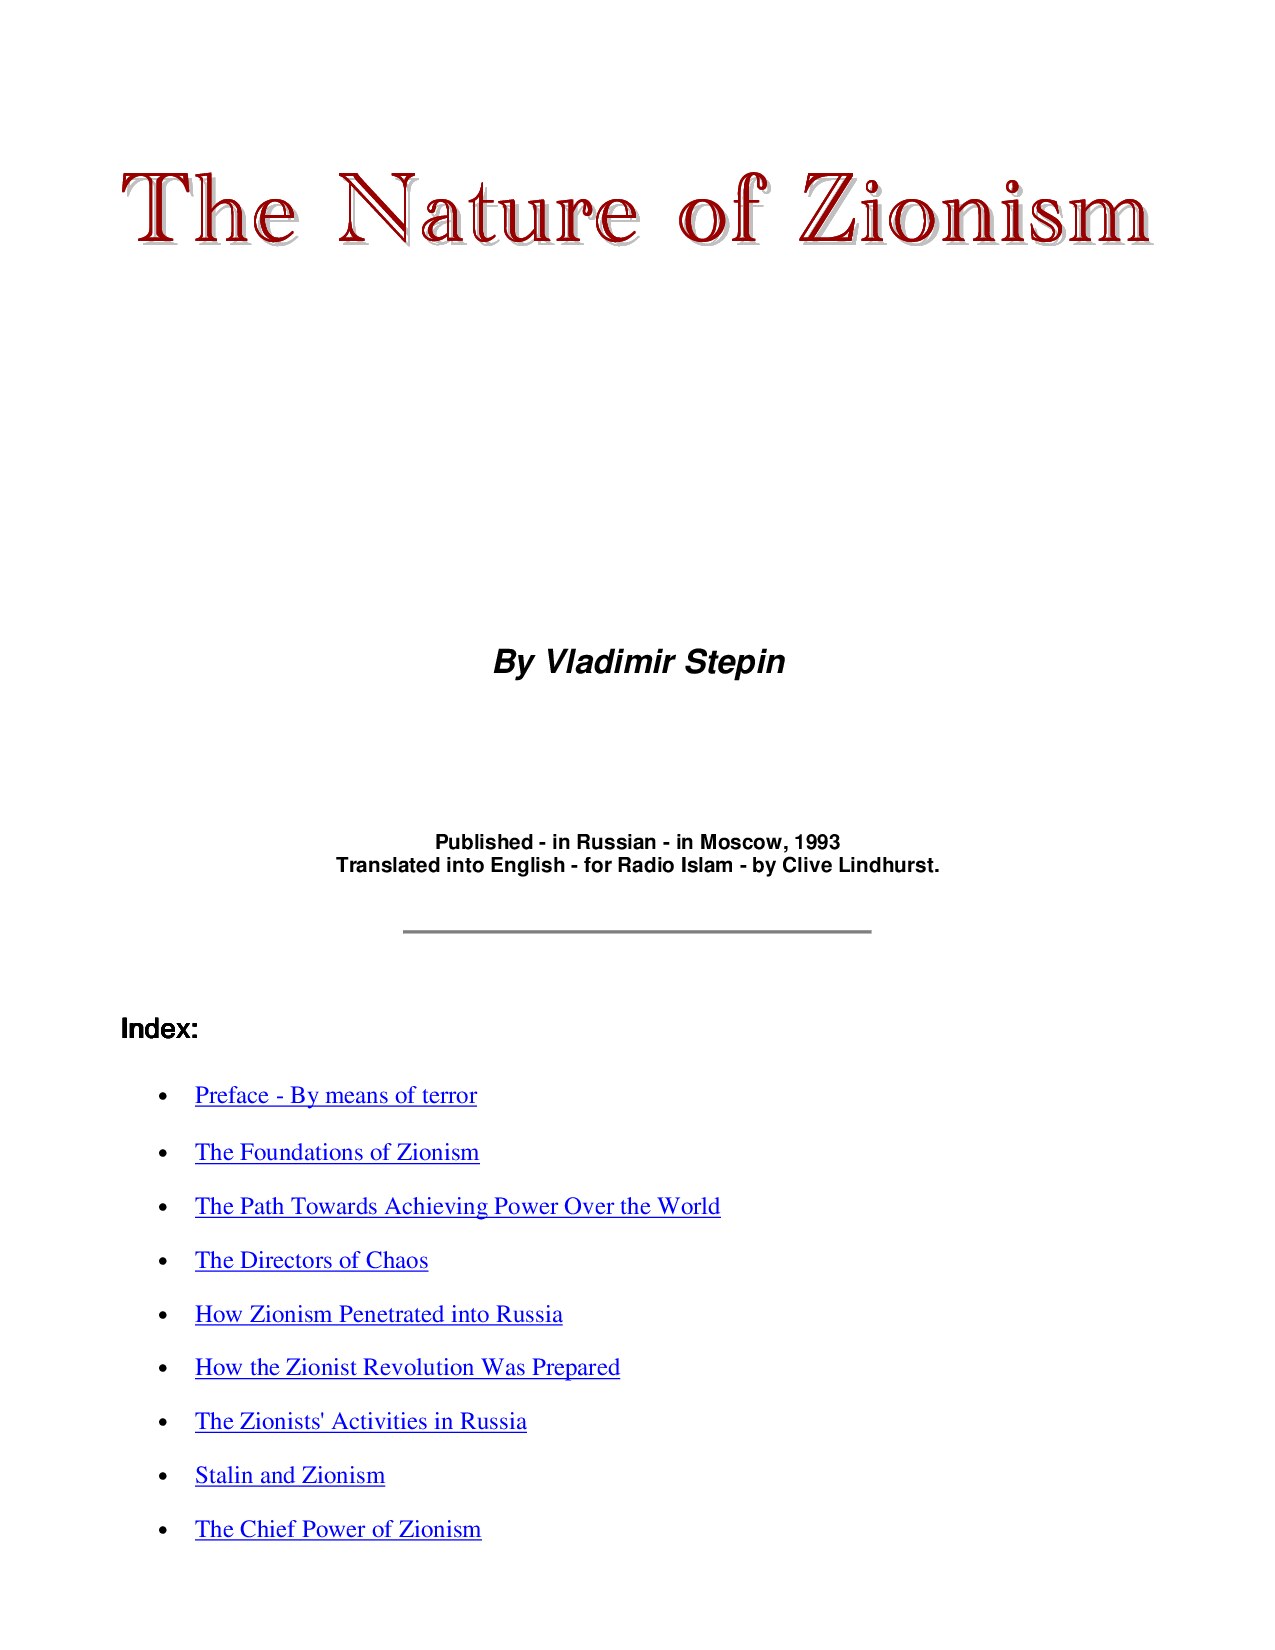 Microsoft Word - The Nature of Zionism.doc